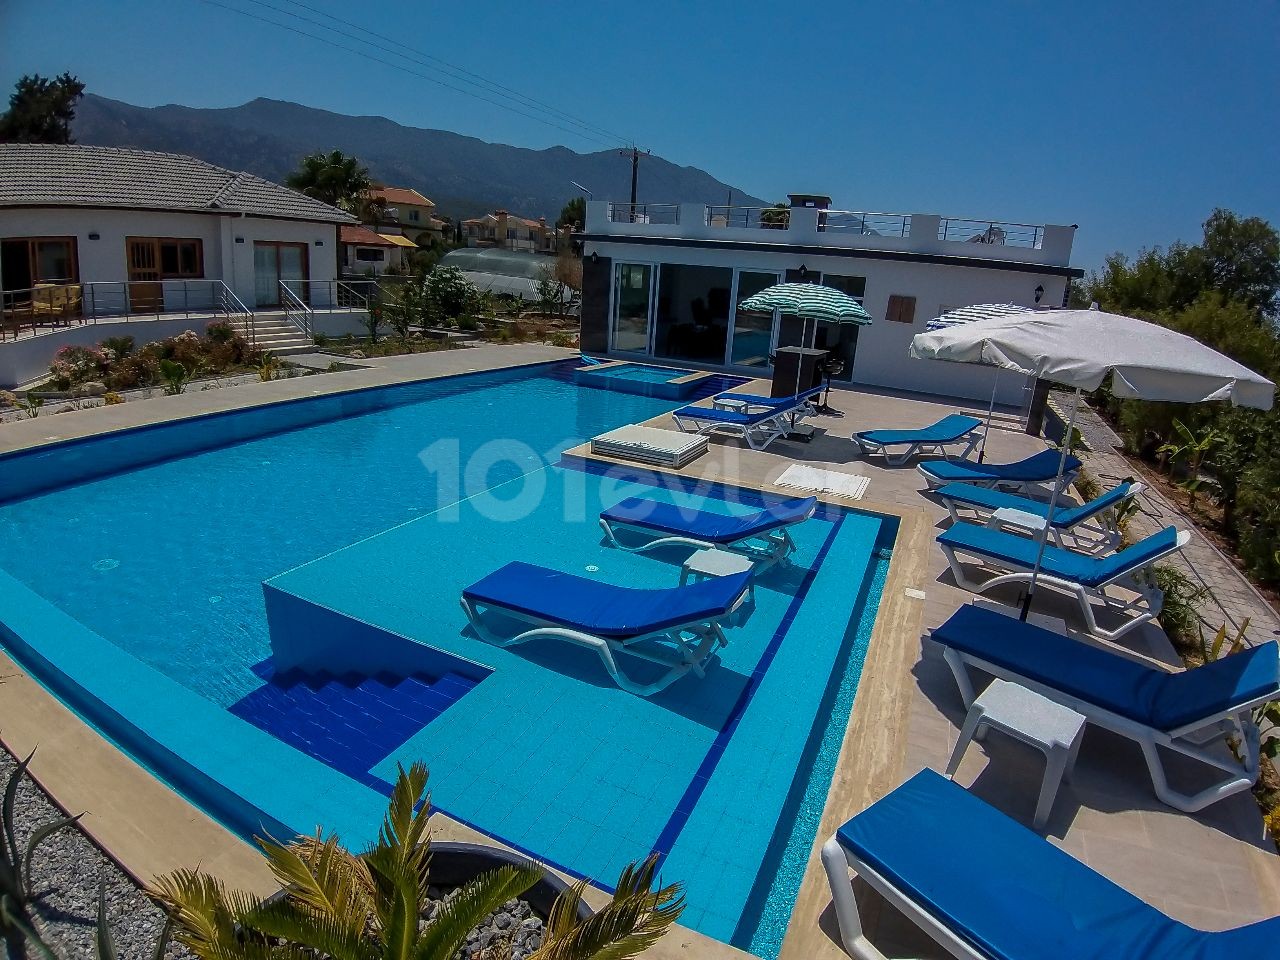 5 Bedroom Villa with Private Pool for Daily Rent in Alsancak region ** 